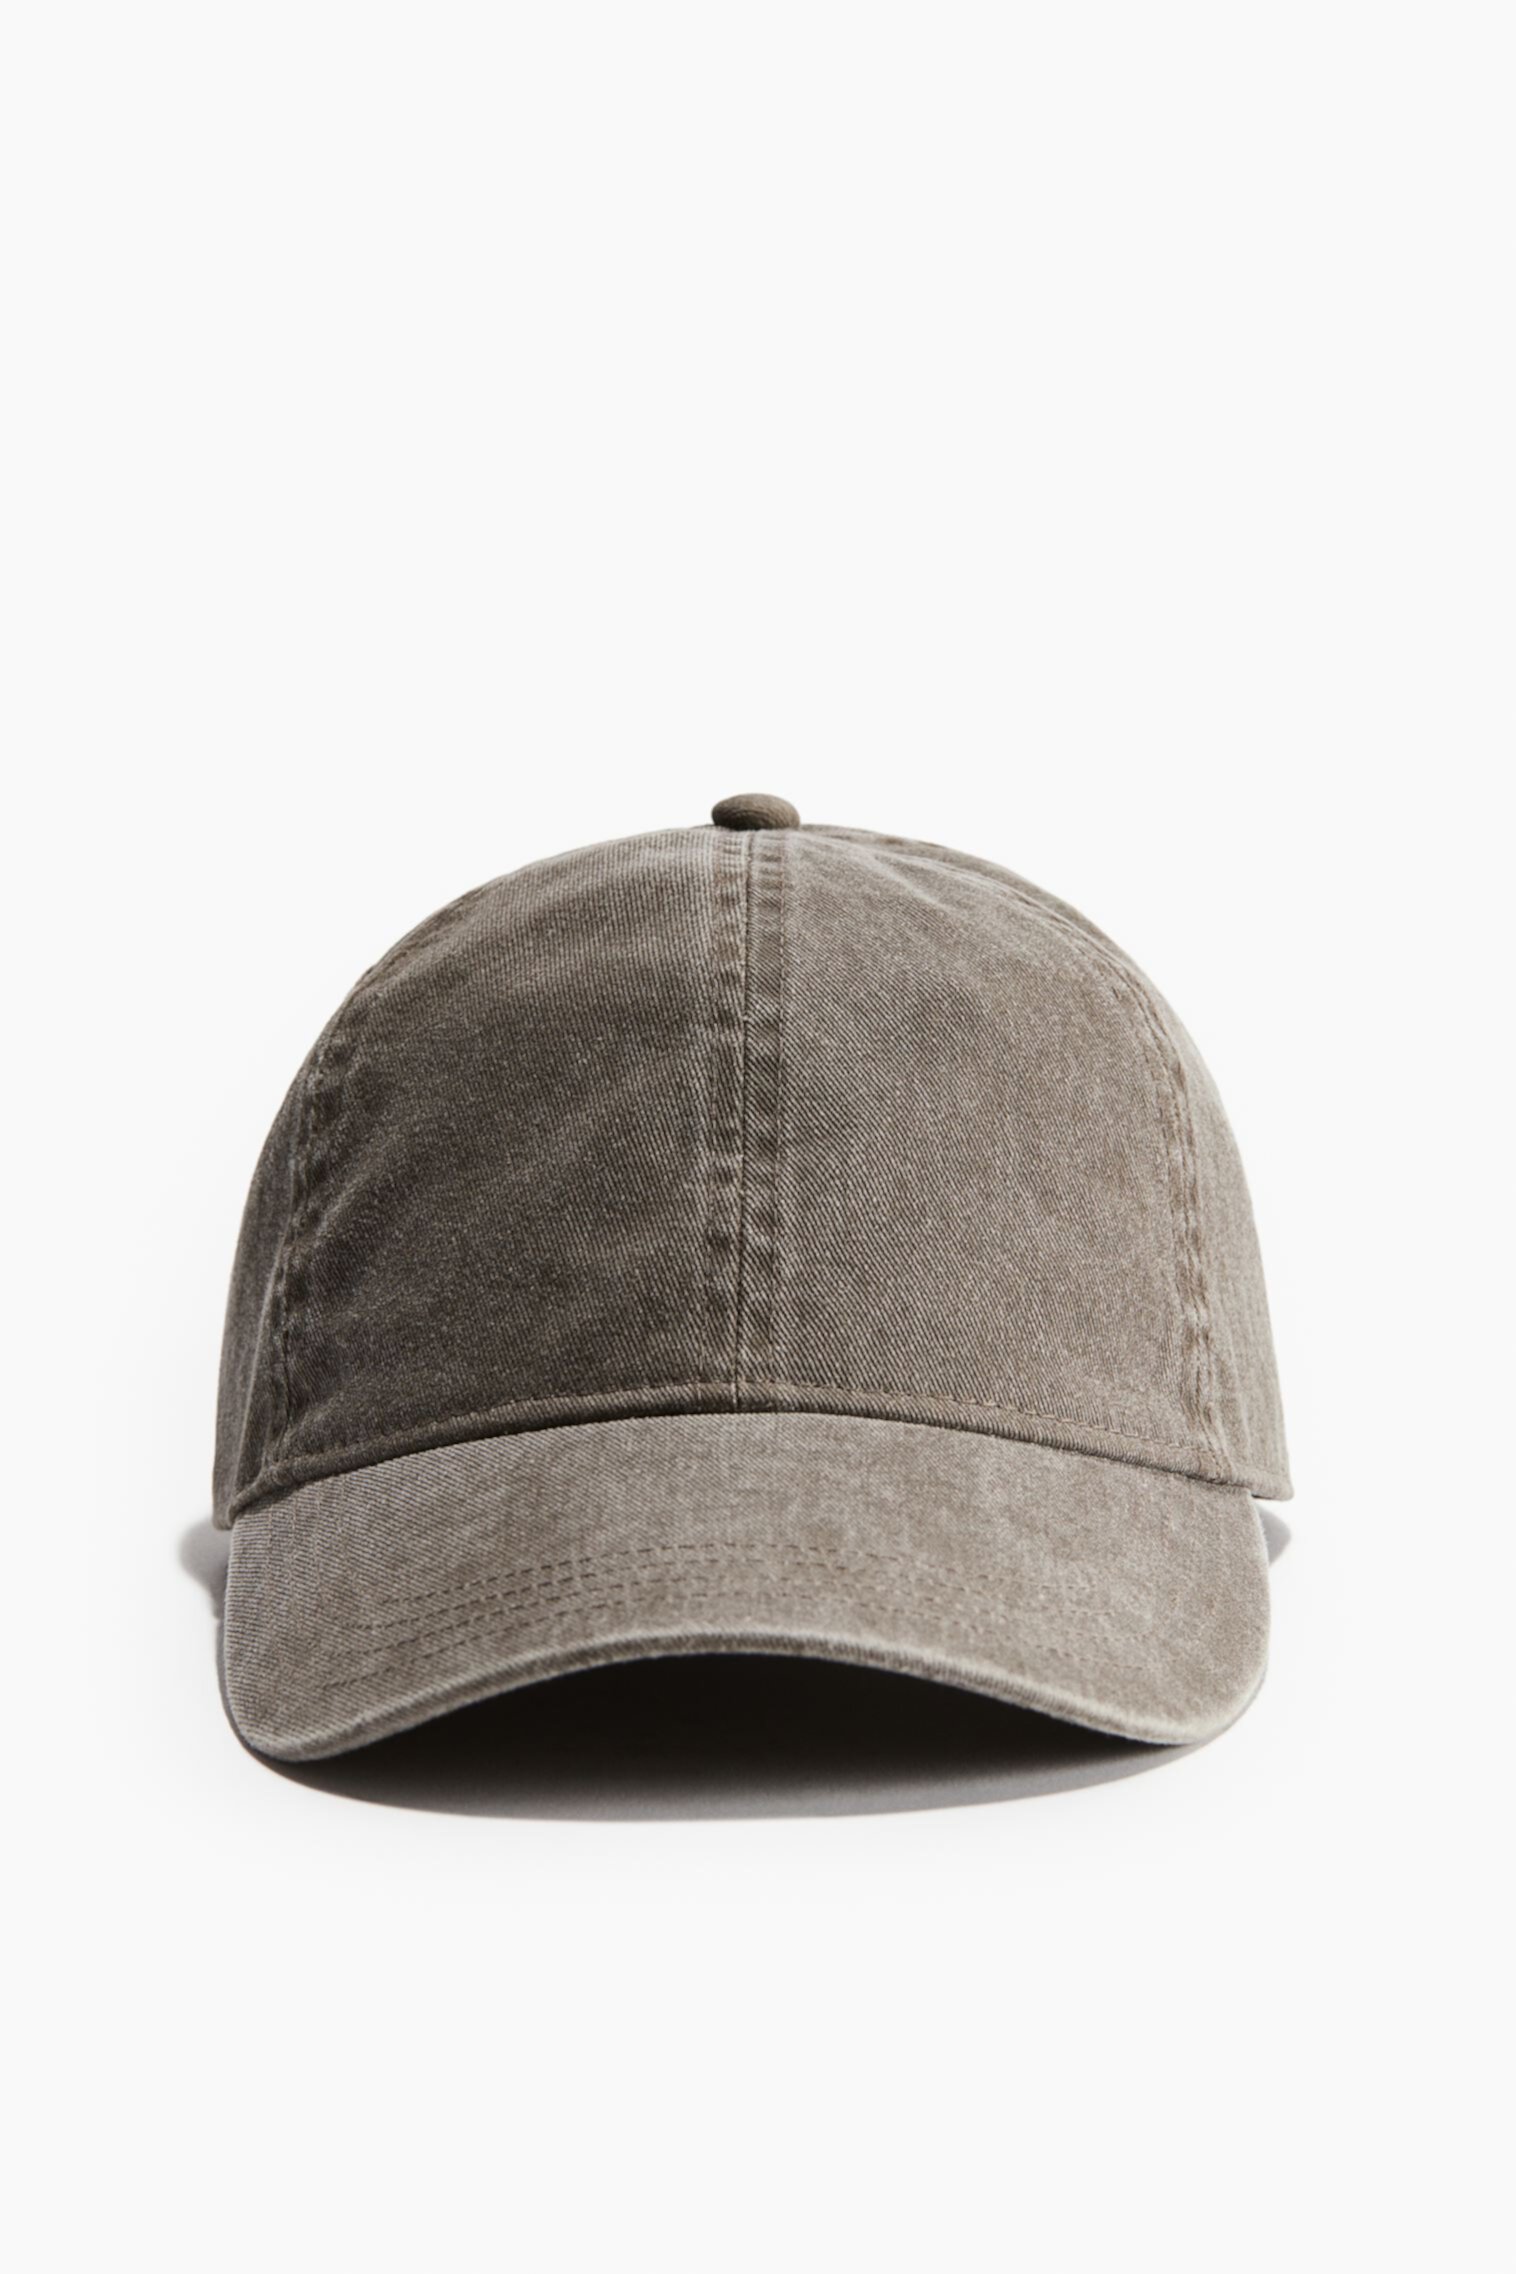 Washed Twill Cap H&M